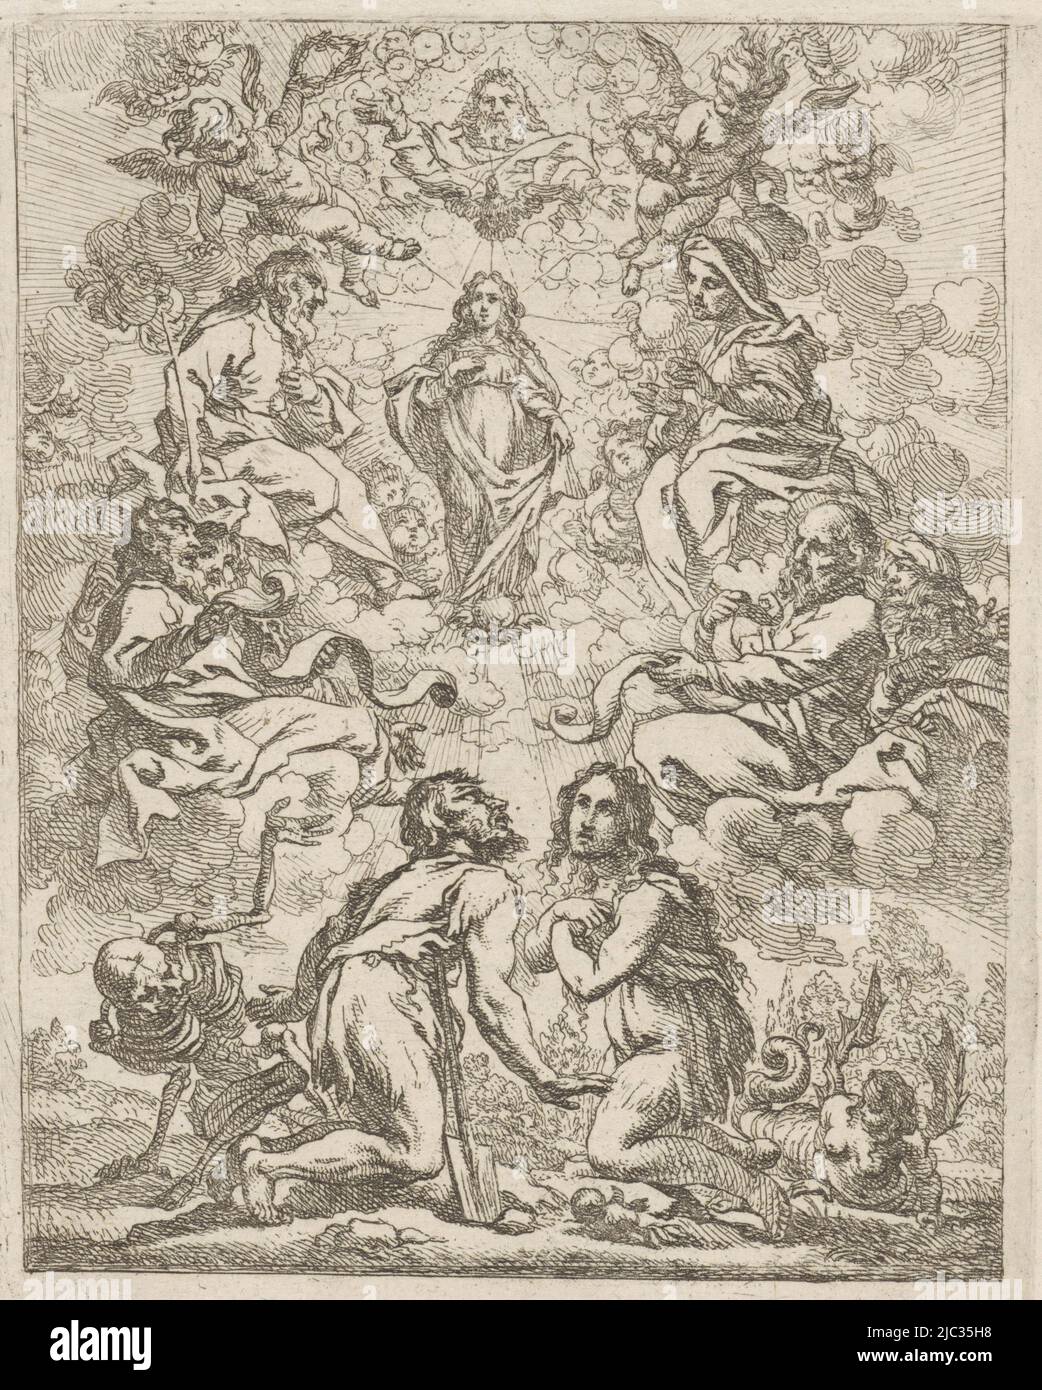 Adam, with Death beside him, and Eve, with the winged serpent behind her, kneel before Mary in the clouds. Mary is surrounded by the community of saints and by putti. Above, God the Father spreading his hands in blessing and the Holy Spirit, Adam and Eve kneeling before Mary, print maker: Cornelis Schut (I), 1618 - 1655, paper, etching, h 193 mm × w 132 mm Stock Photo